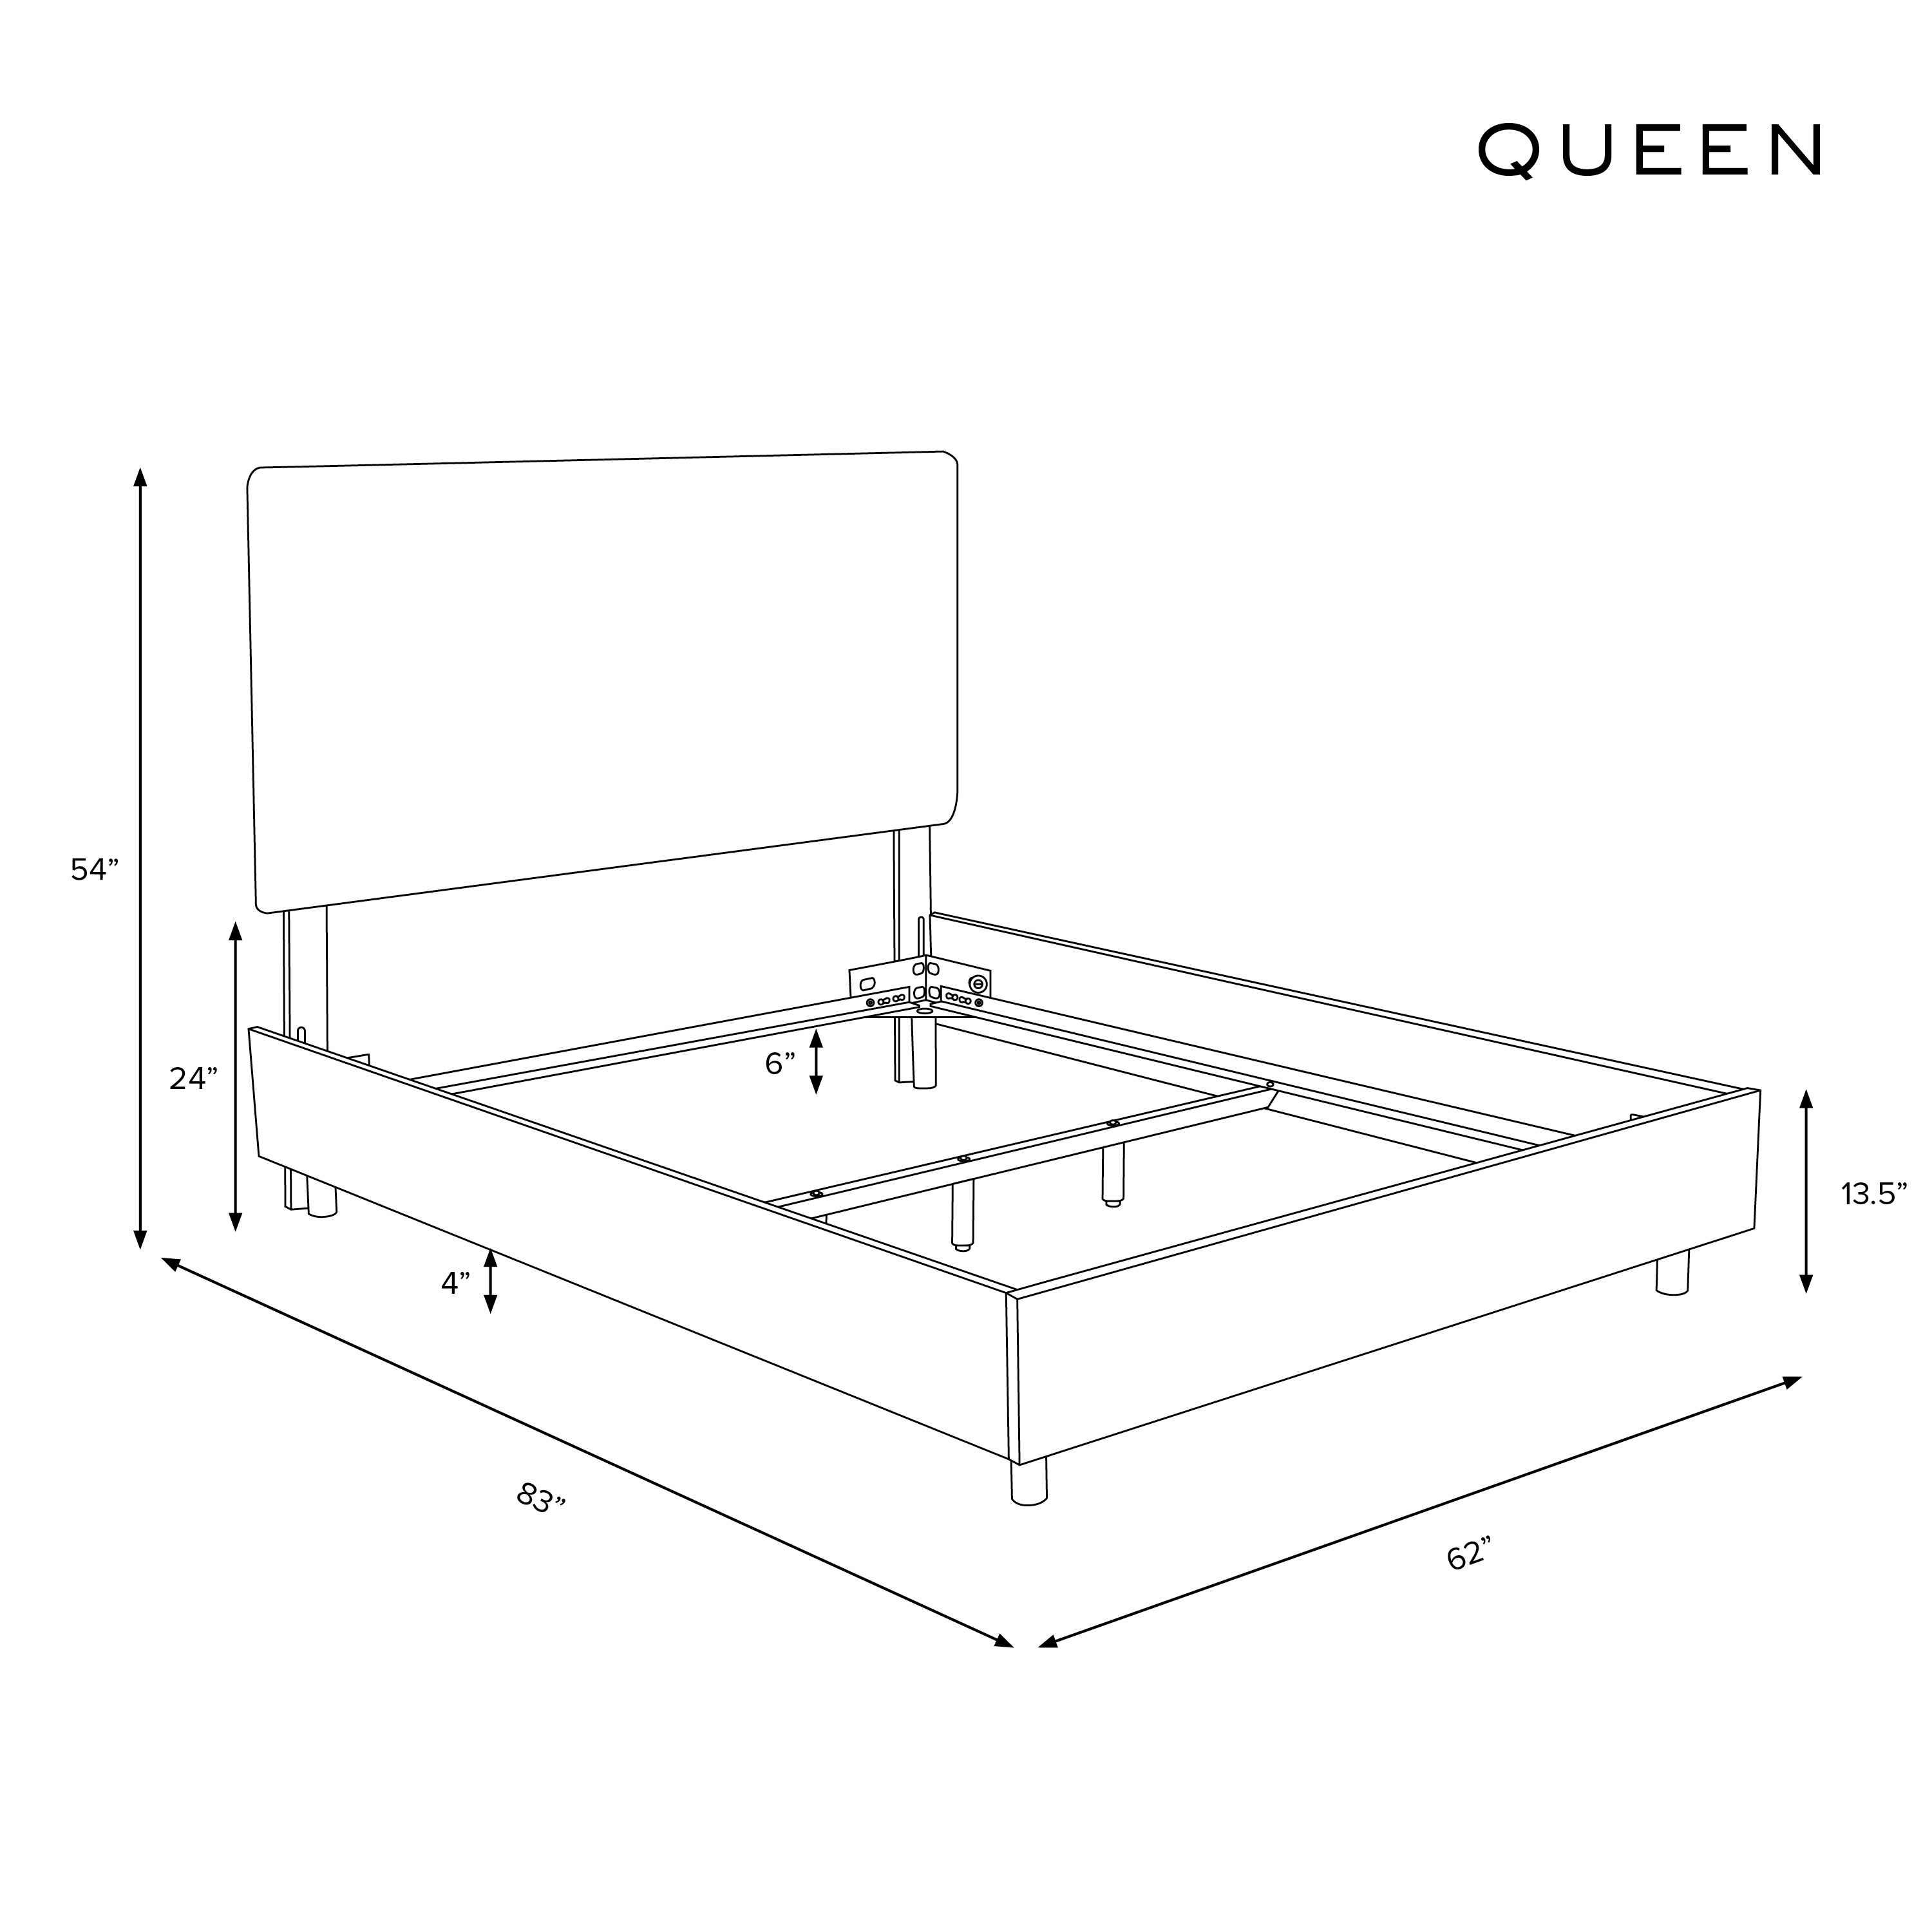 Lafayette Bed, Queen, White - Image 5